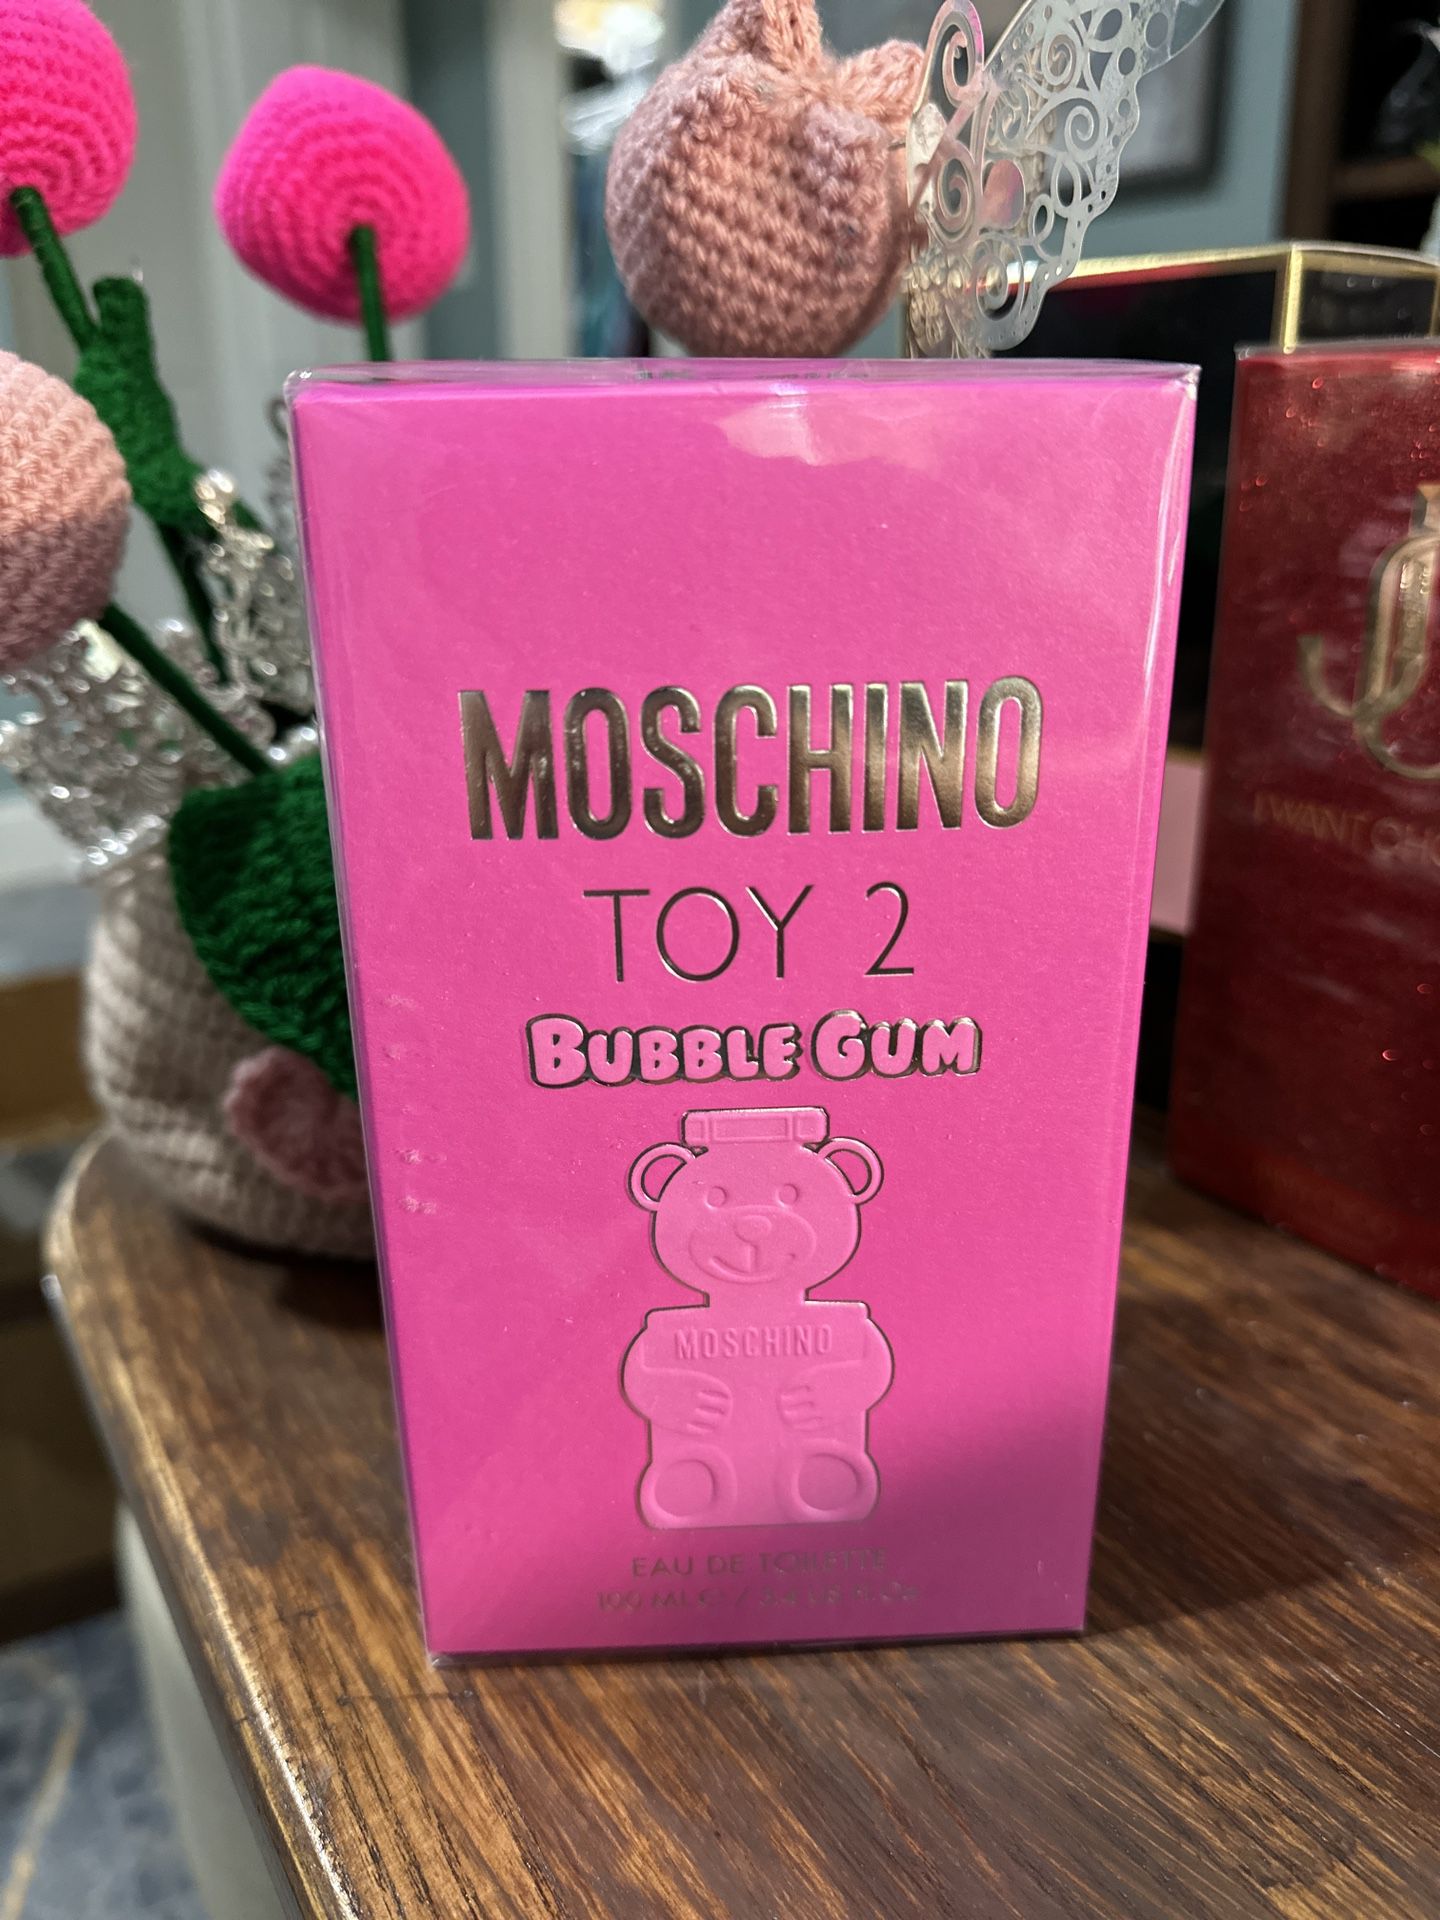 Moschino Toy 2 Bubble Gum 